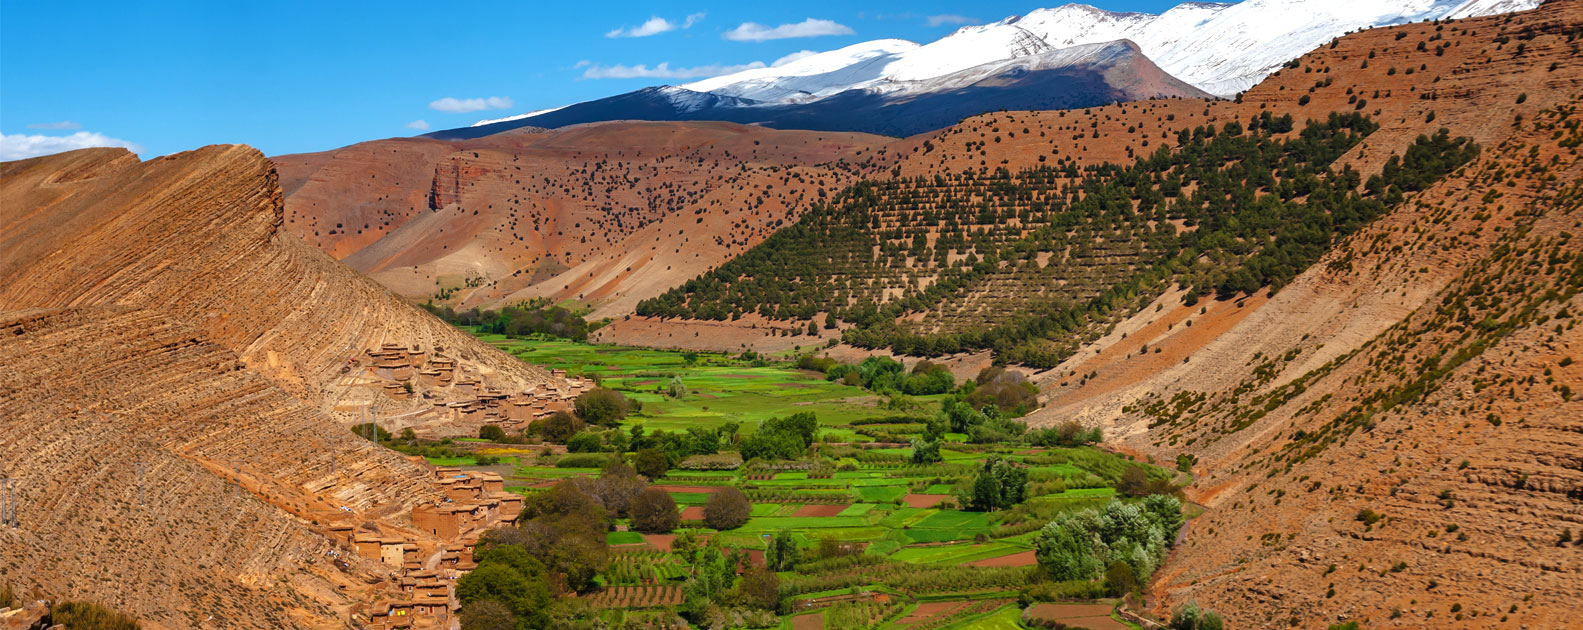 Azilal, pearl of the Atlas Mountains